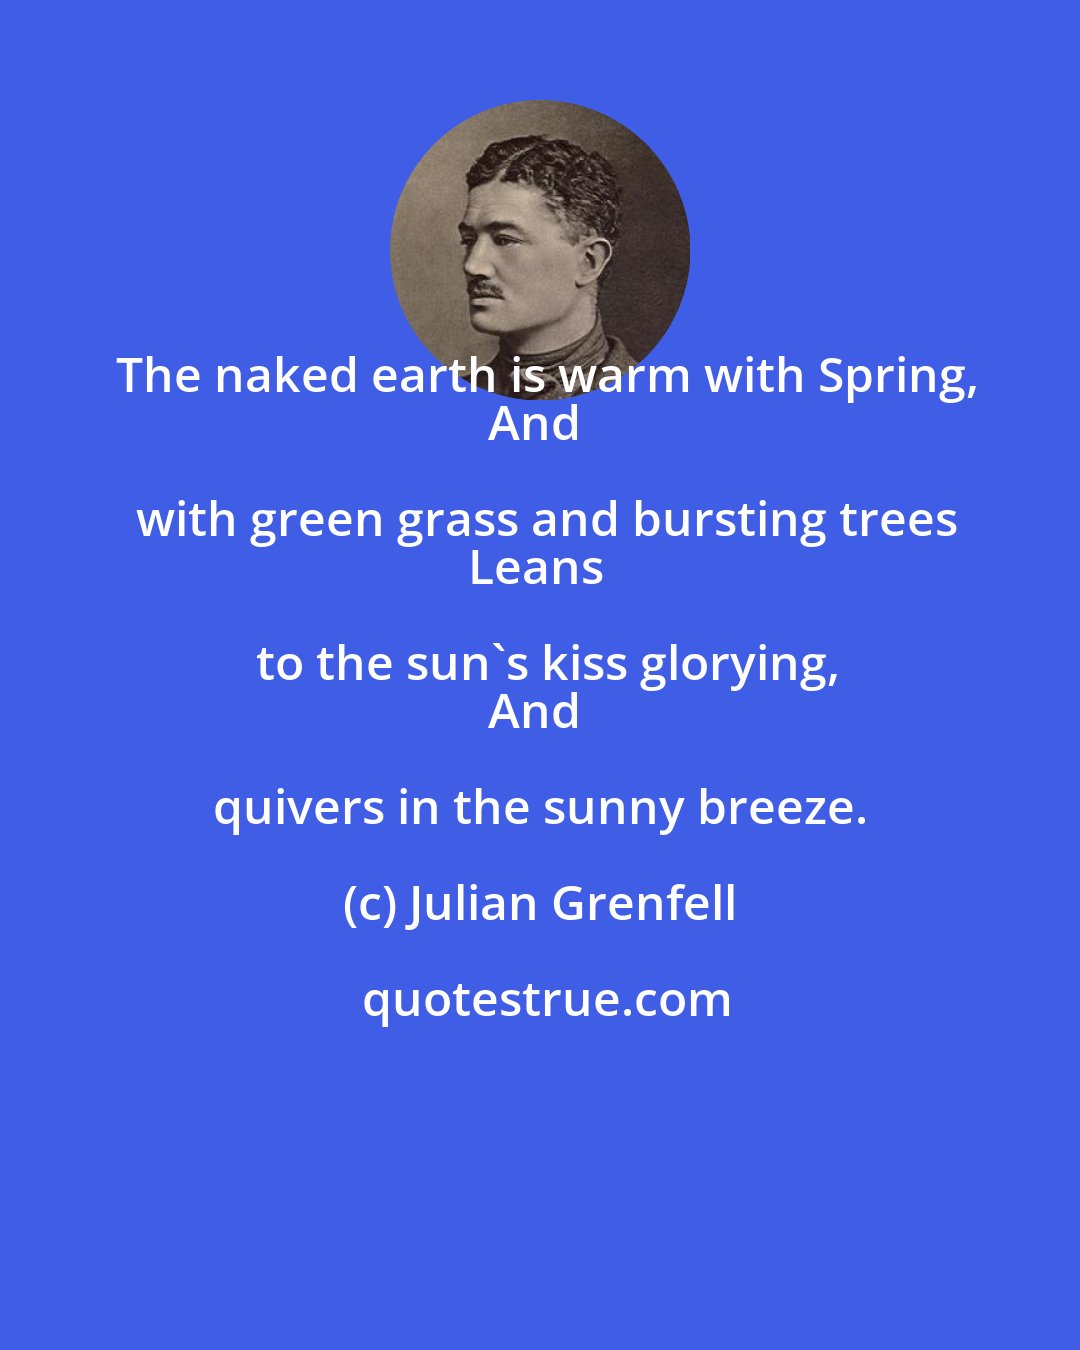 Julian Grenfell: The naked earth is warm with Spring,
And with green grass and bursting trees
Leans to the sun's kiss glorying,
And quivers in the sunny breeze.